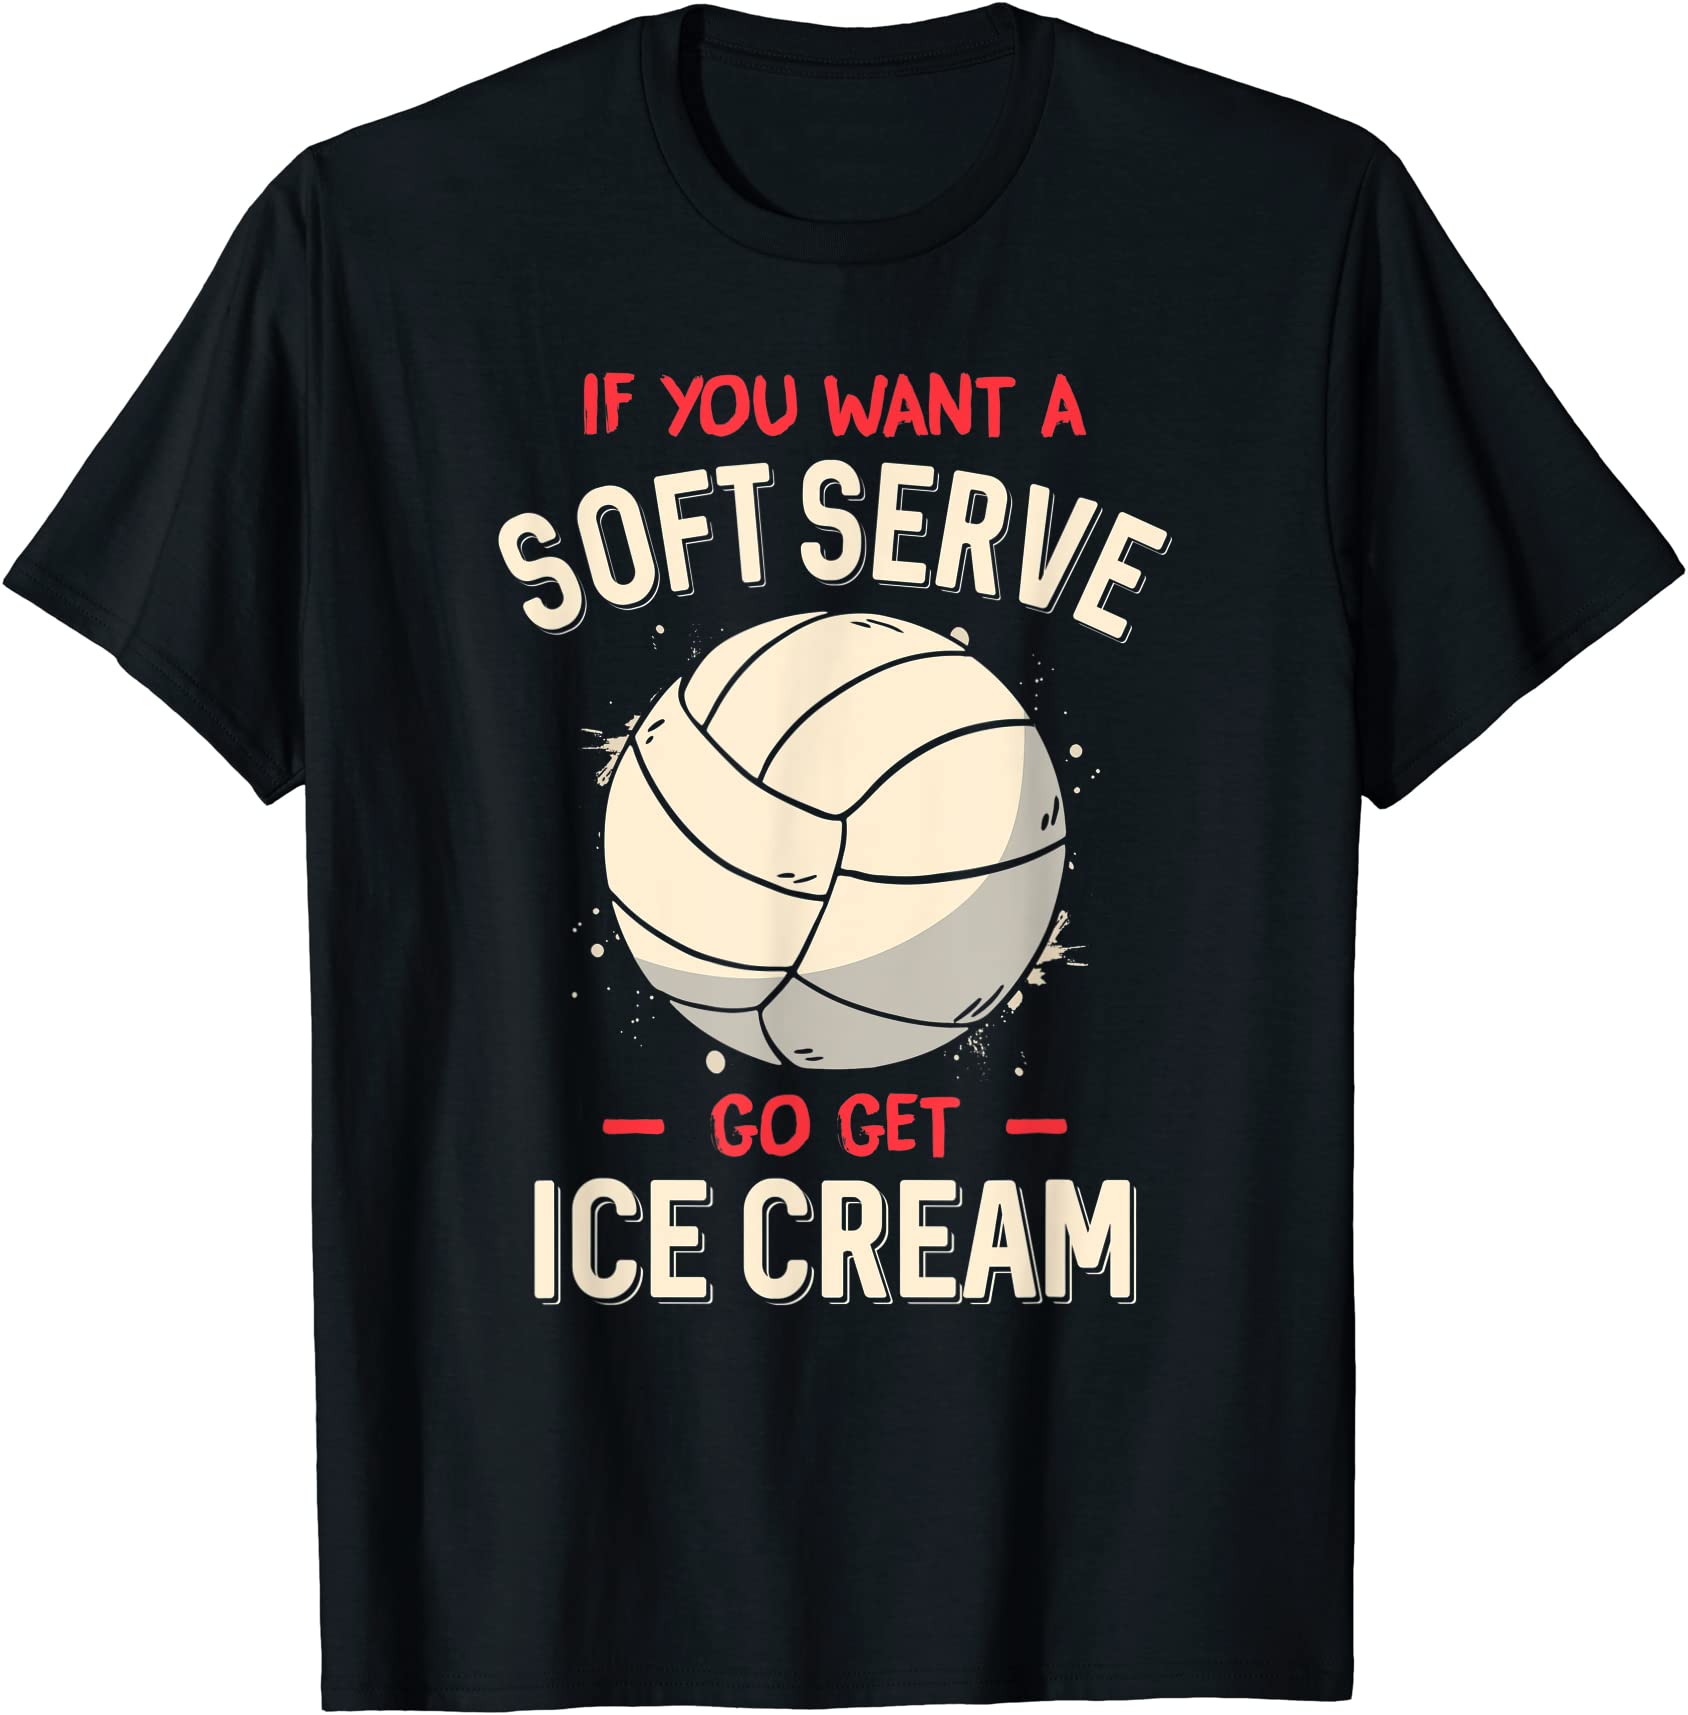 funny volleyball if you want a soft serve voleyball t shirt men - Buy t ...